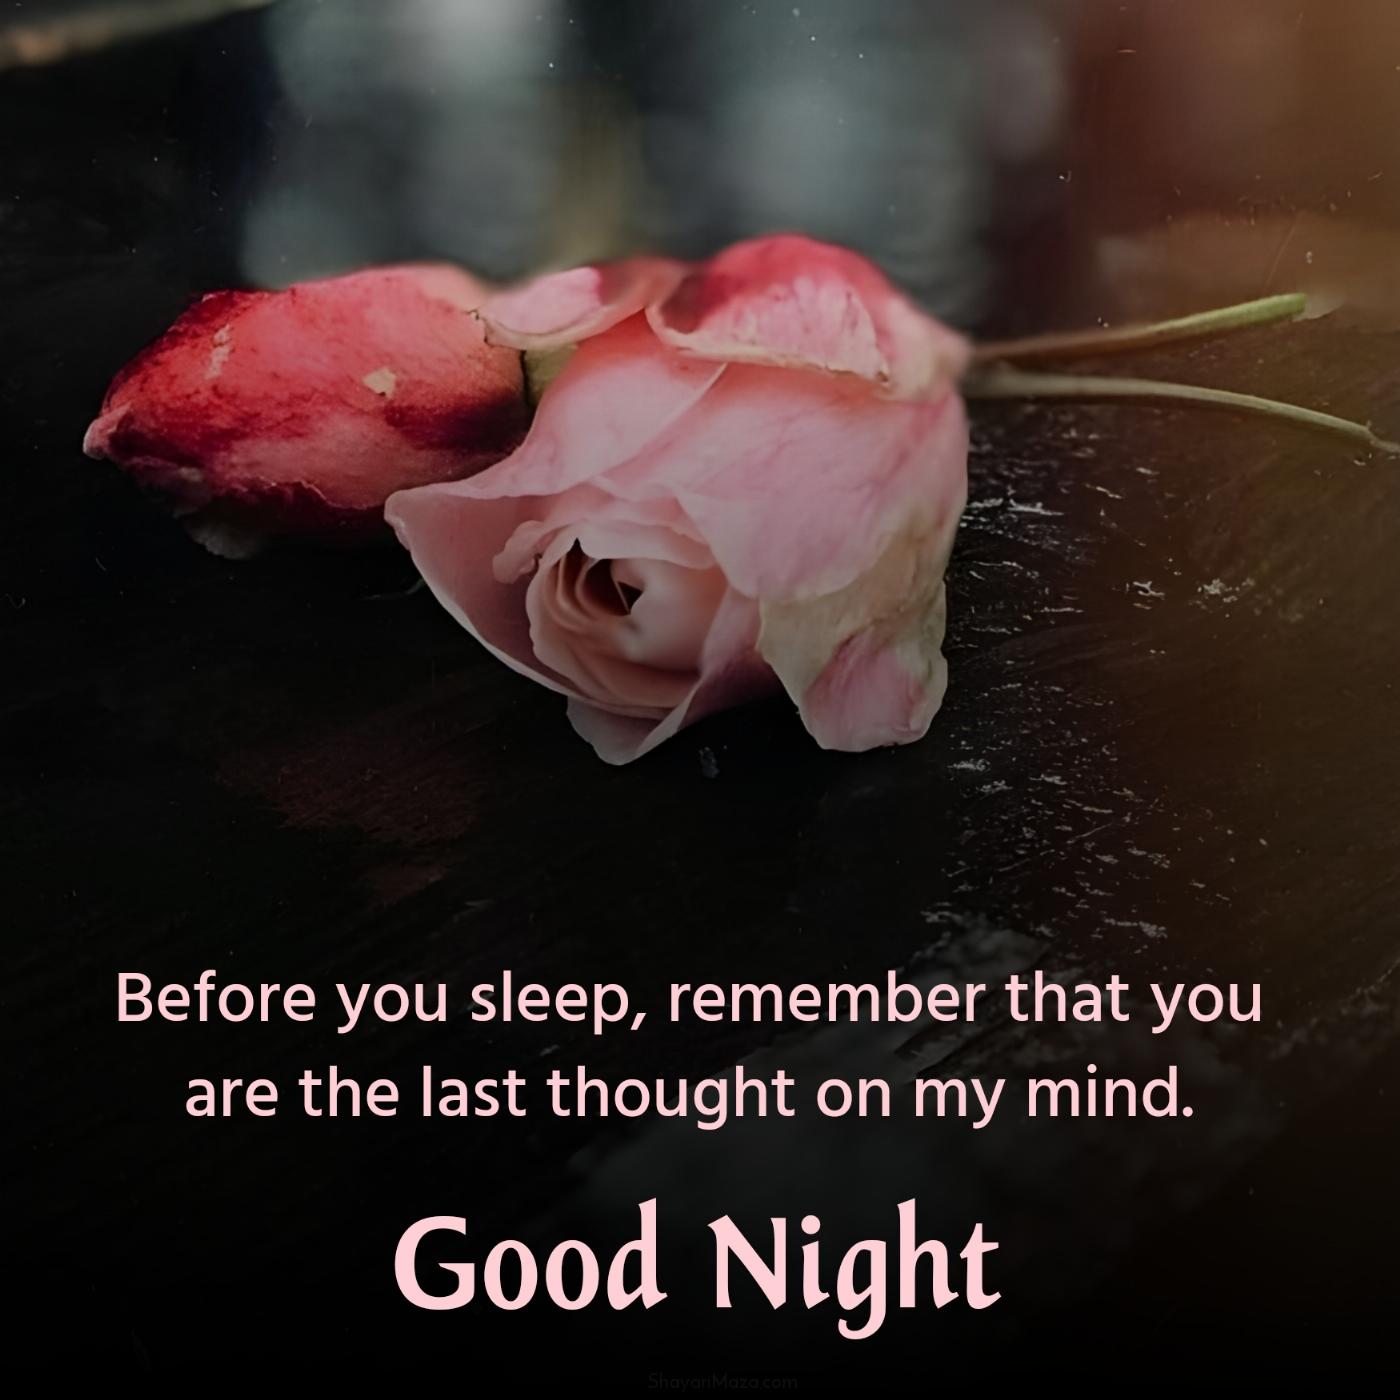 Before you sleep remember that you are the last thought on my mind